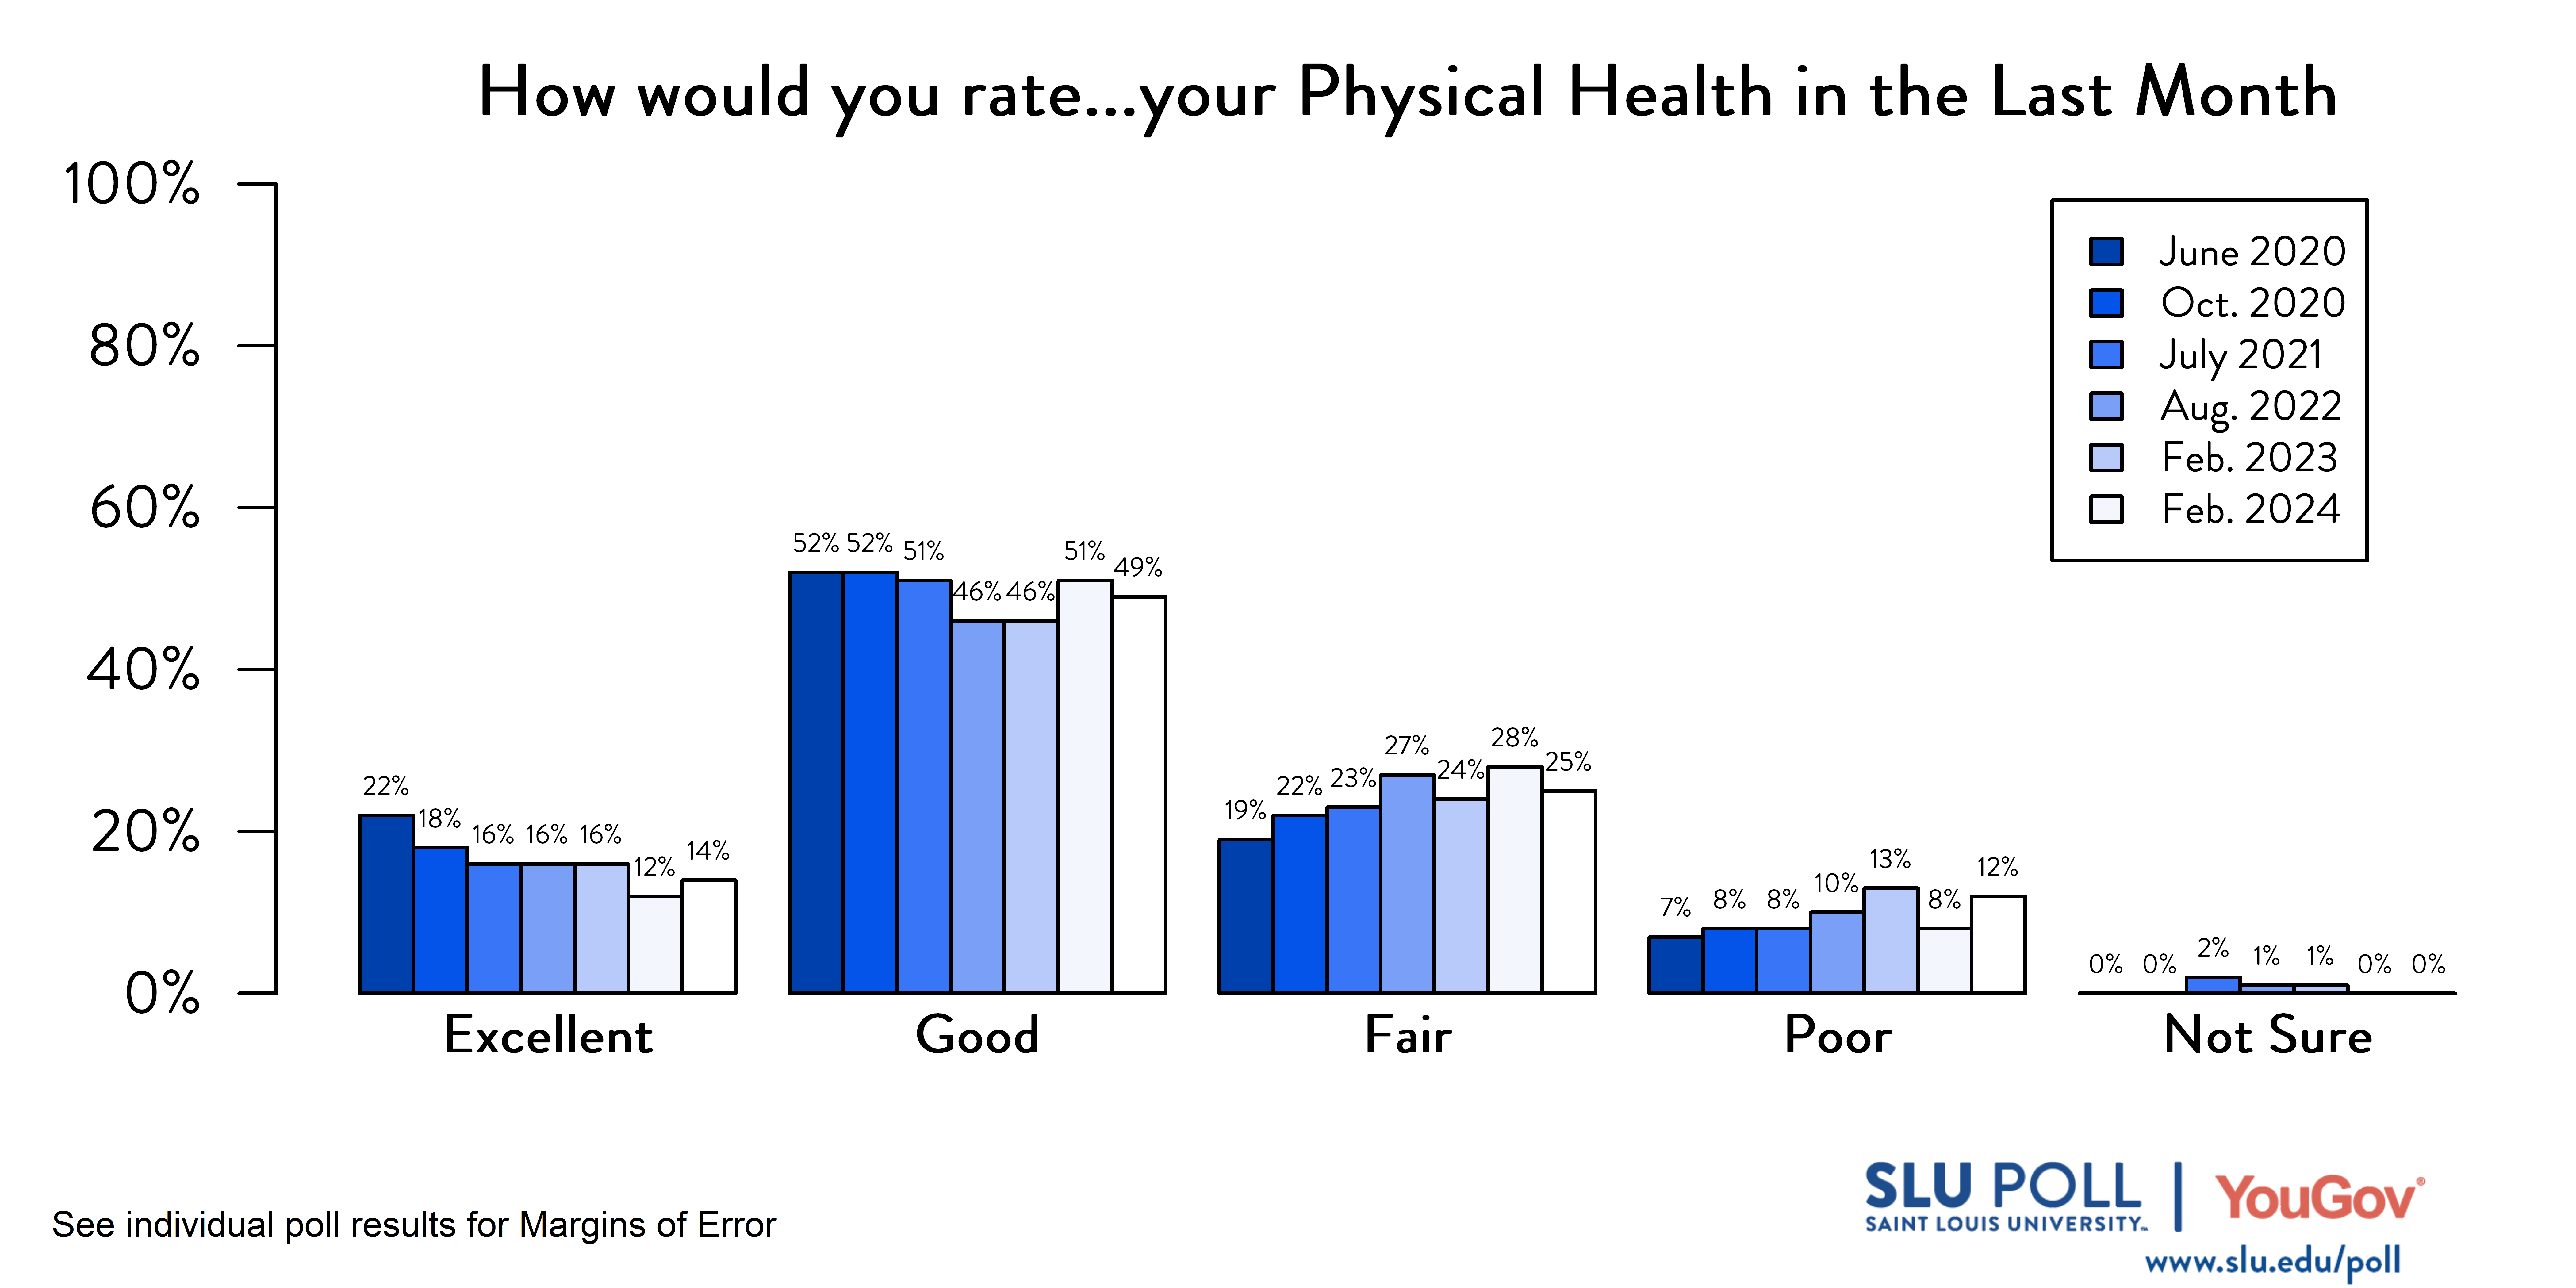 Likely voters' responses to 'How would you rate the condition of the following…Your physical health in the last month?'. June 2020 Voter Responses 22% Excellent, 52% Good, 19% Fair, 7% Poor, and 0% Not sure. October 2020 Voter Responses: 18% Excellent, 52% Good, 22% Fair, 8% Poor, and 0% Not sure. July 2021 Voter Responses: 16% Excellent, 51% Good, 23% Fair, 8% Poor, and 2% Not sure. August 2022 Voter Responses: 16% Excellent, 46% Good, 27% Fair, 10% Poor, and 1% Not sure. February 2023 Voter Responses: 16% Excellent, 46% Good, 24% Fair, 13% Poor, and 1% Not sure. February 2024 Voter Responses: 14% Excellent, 49% Good, 25% Fair, 12% Poor, and 0% Not sure.